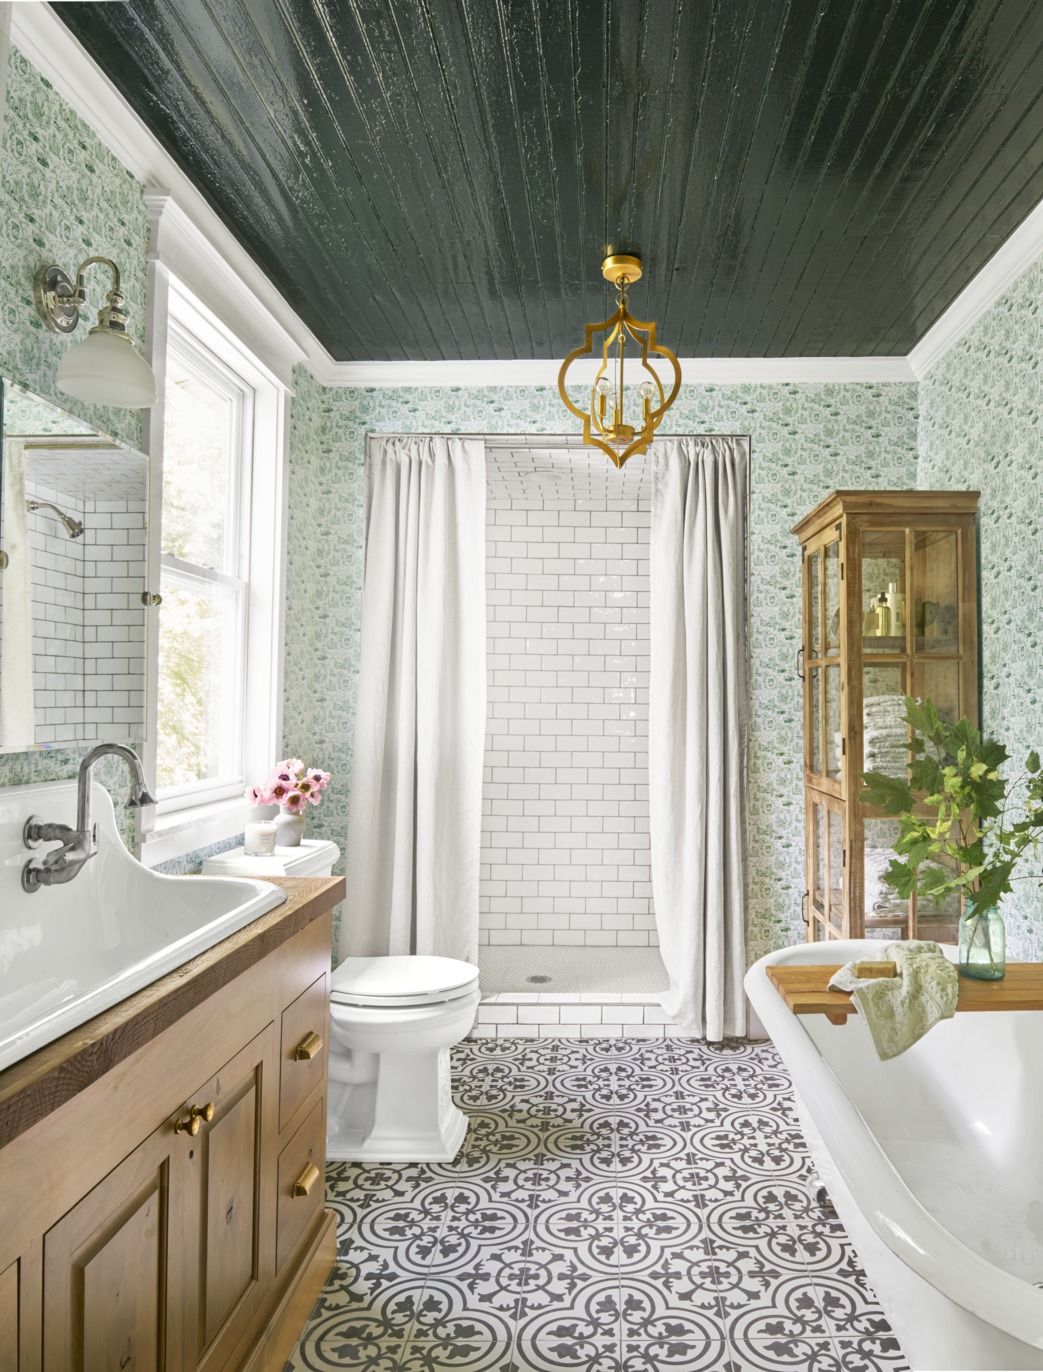 20 Bathroom Lighting Ideas to Make You Look Your Best